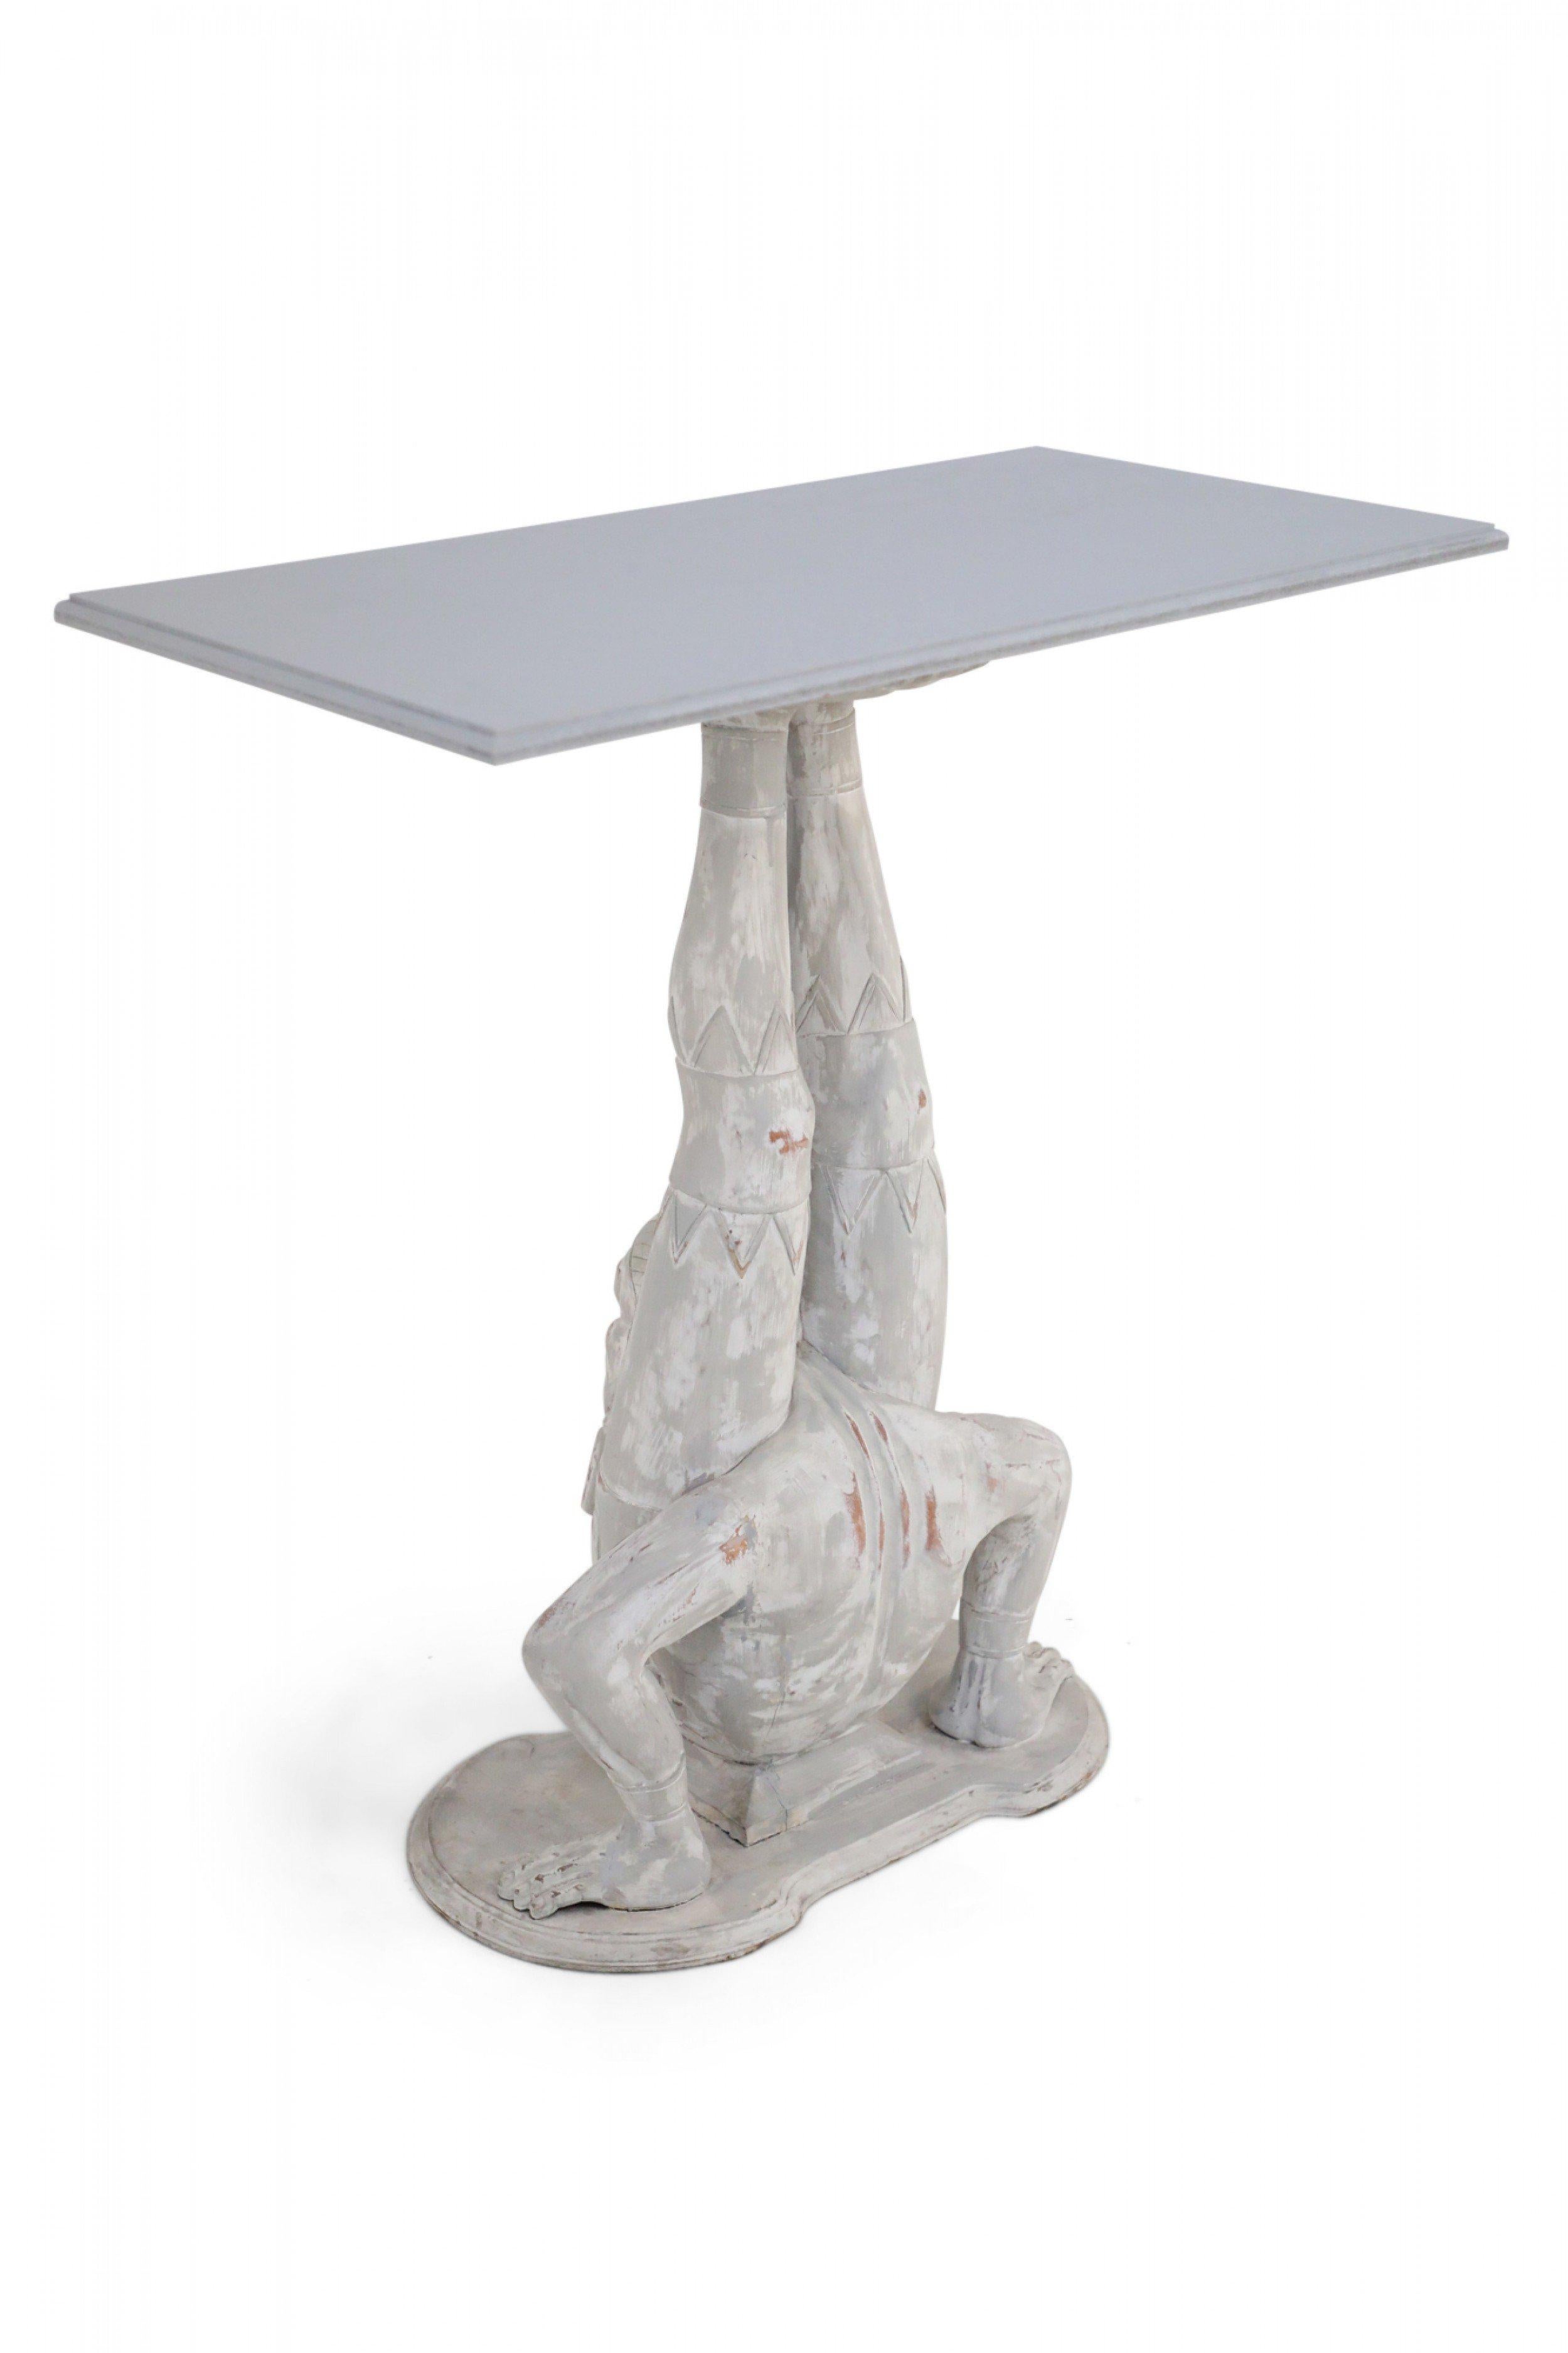 Pair of Chinese console tables comprised of whitewashed wooden bases carved to resemble acrobatic figures supporting gray, rectangular tops (Priced as pair).